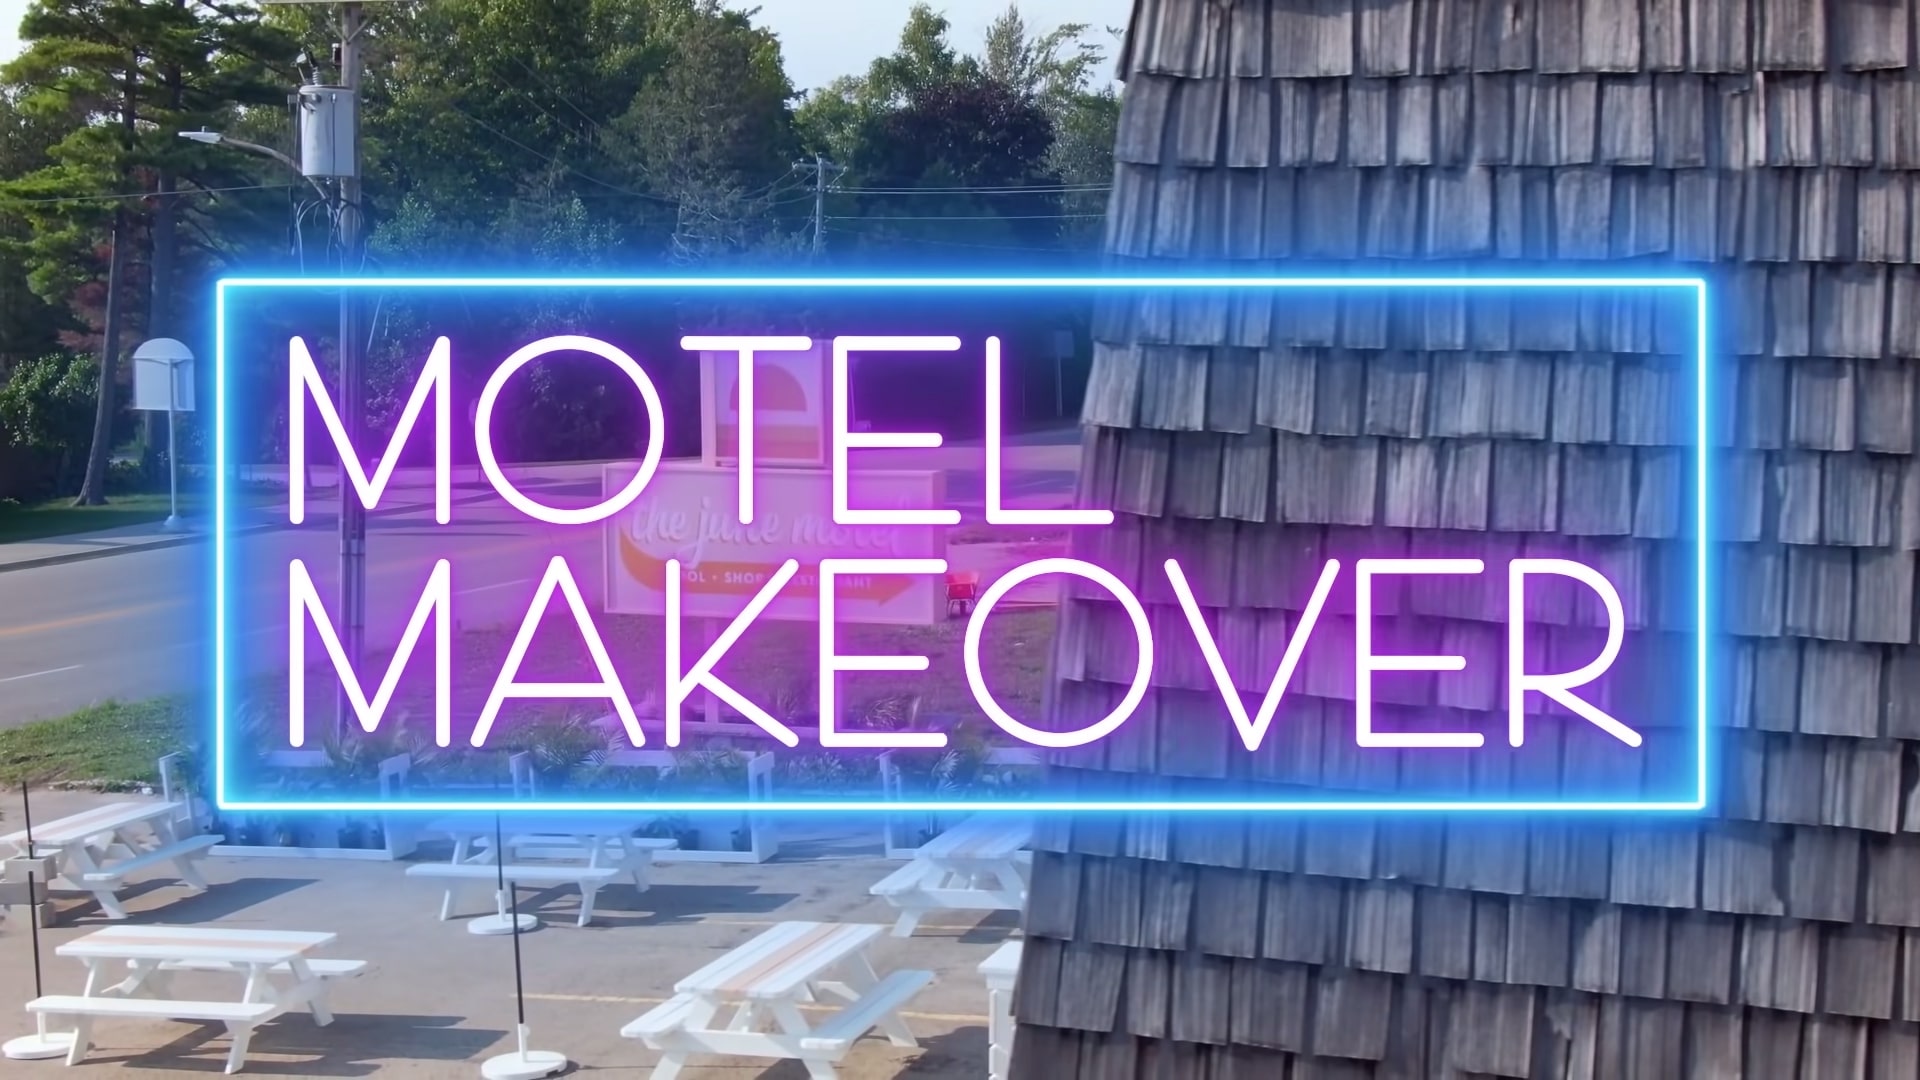 Netflix Motel Makeover Season 1 Trailer, Coming to Netflix in August 2021